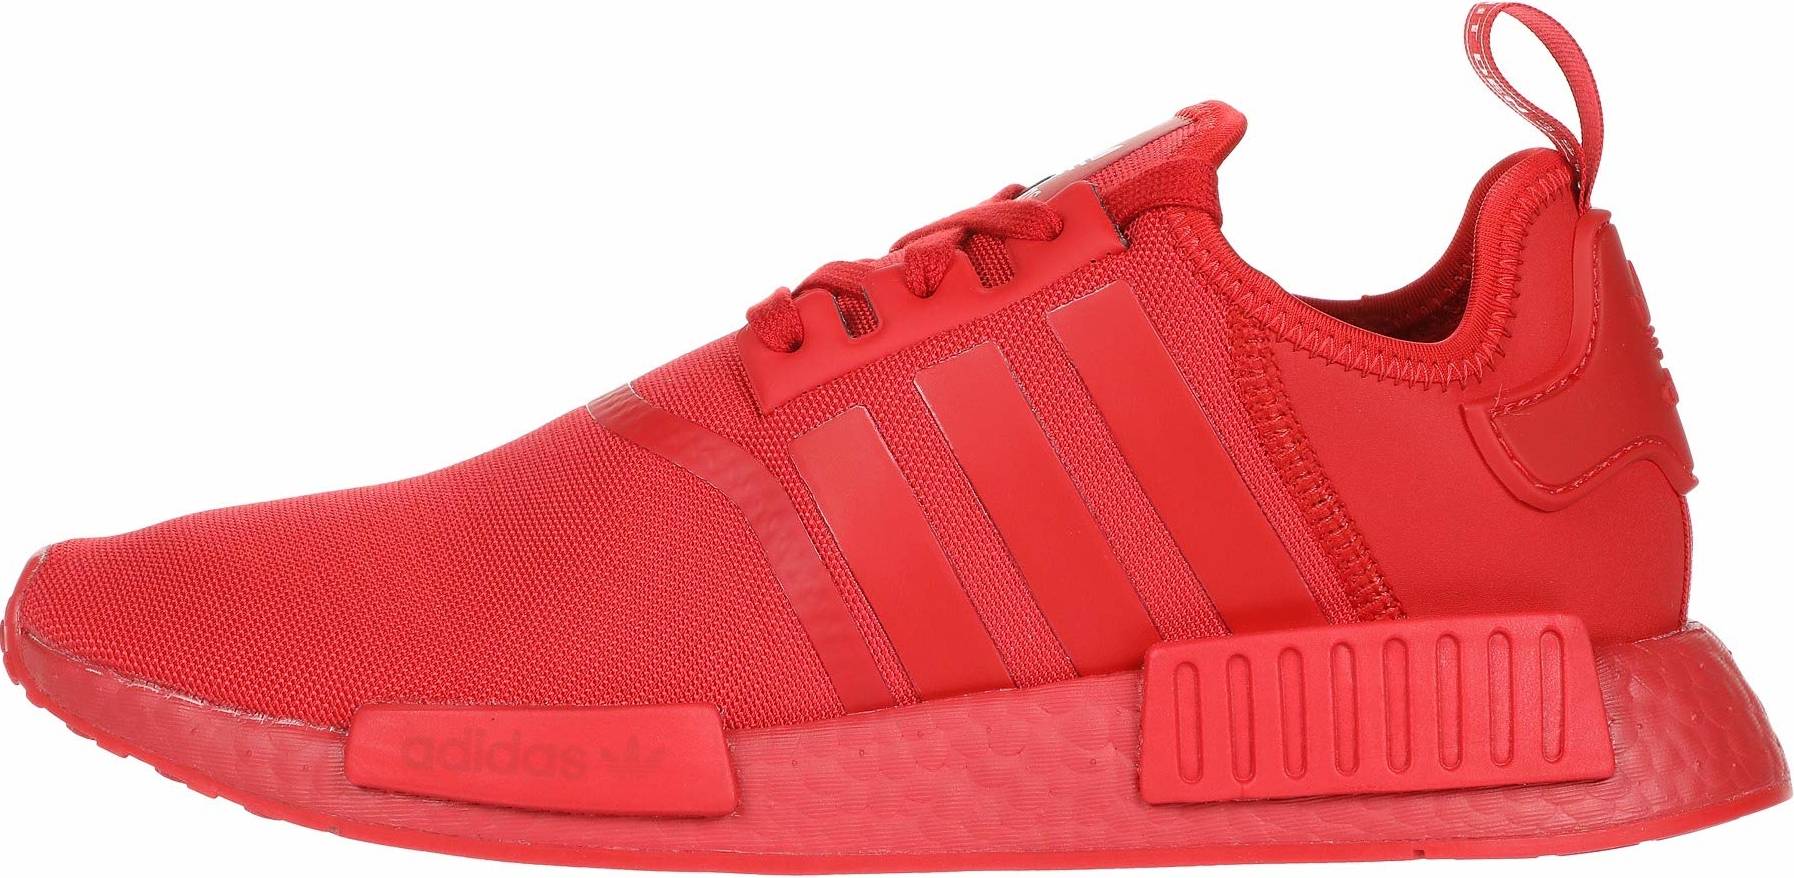 adidas red sneakers for men